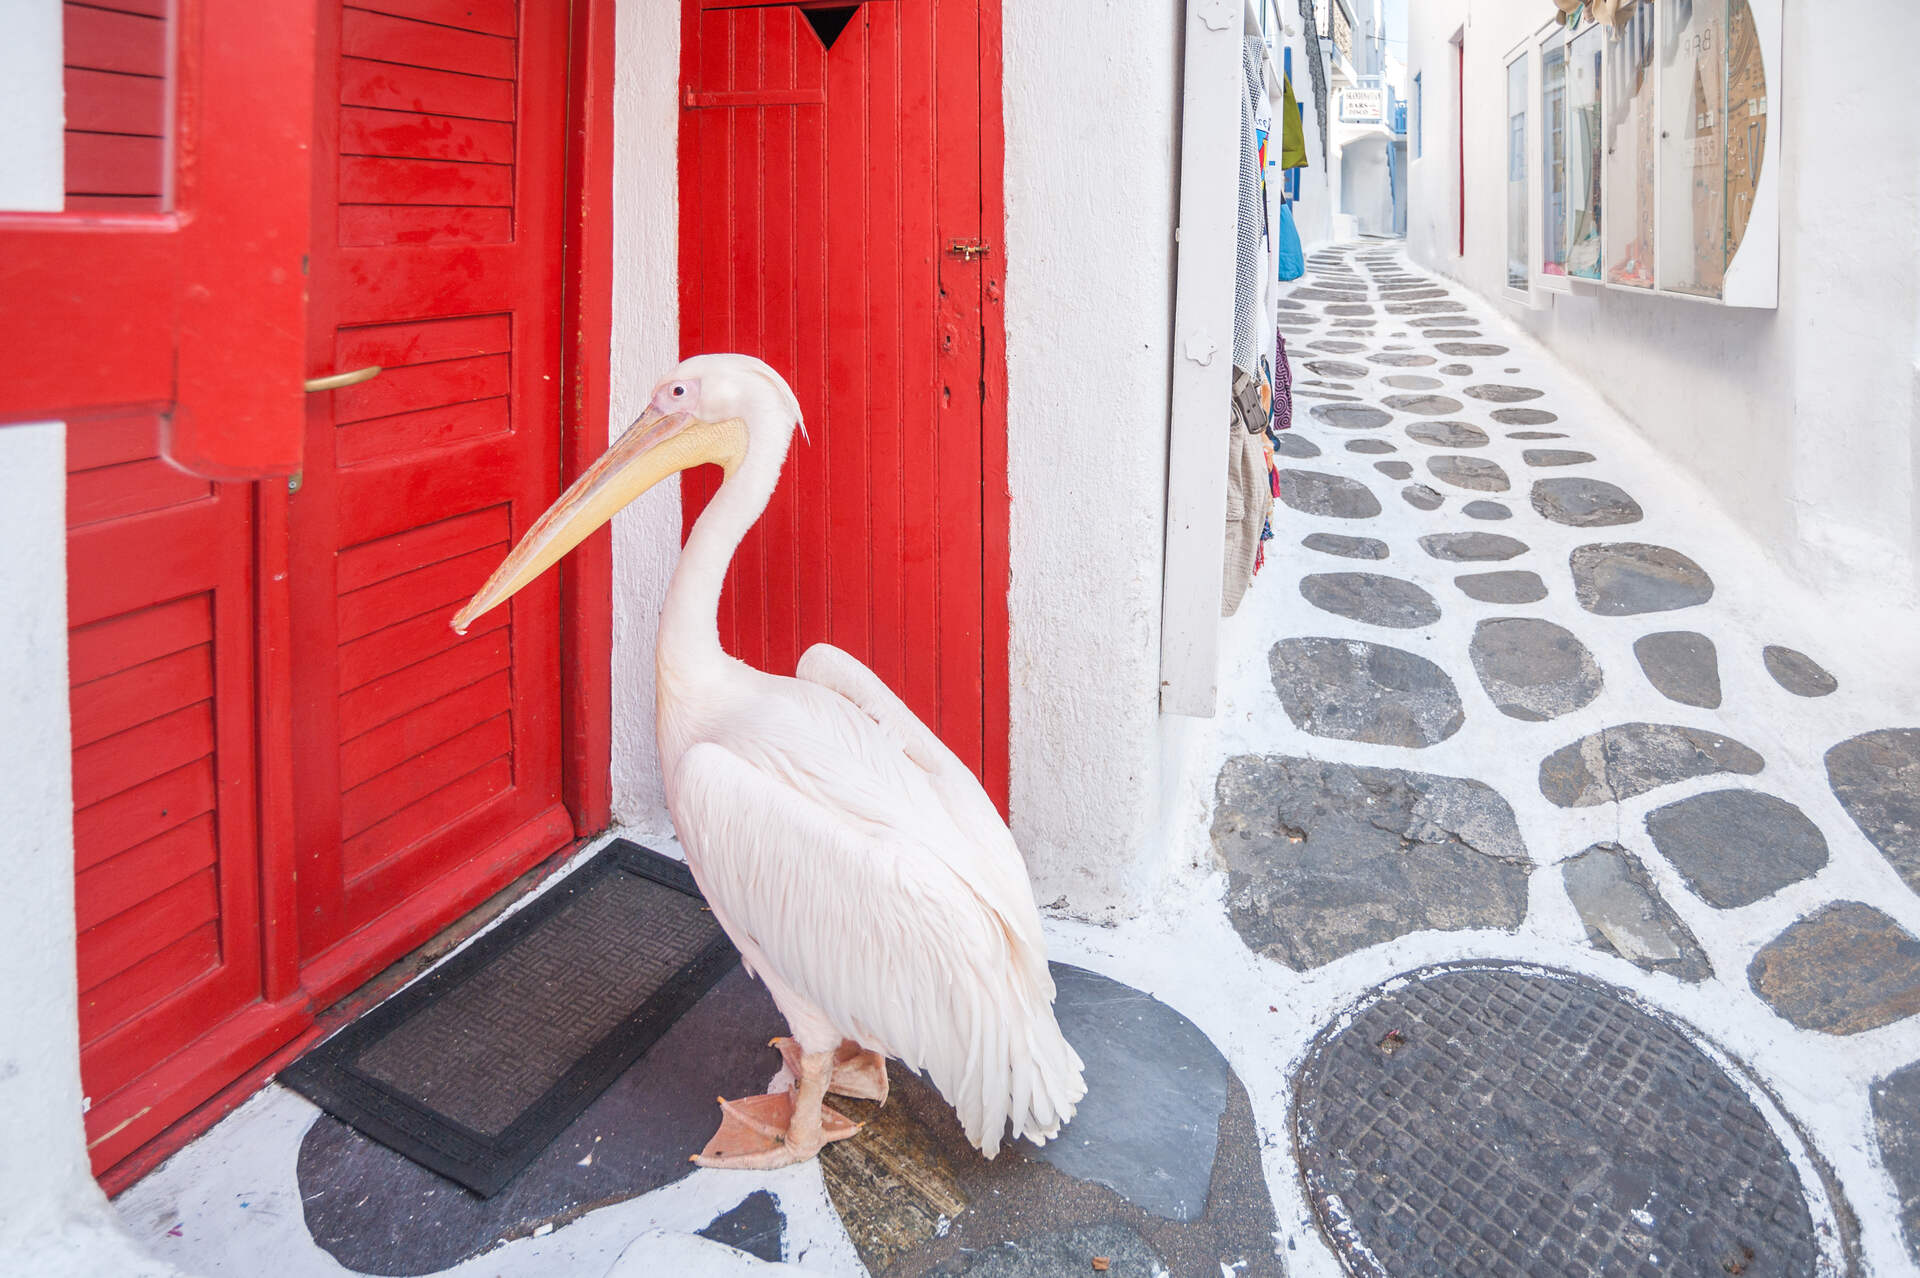 A pelican on the street